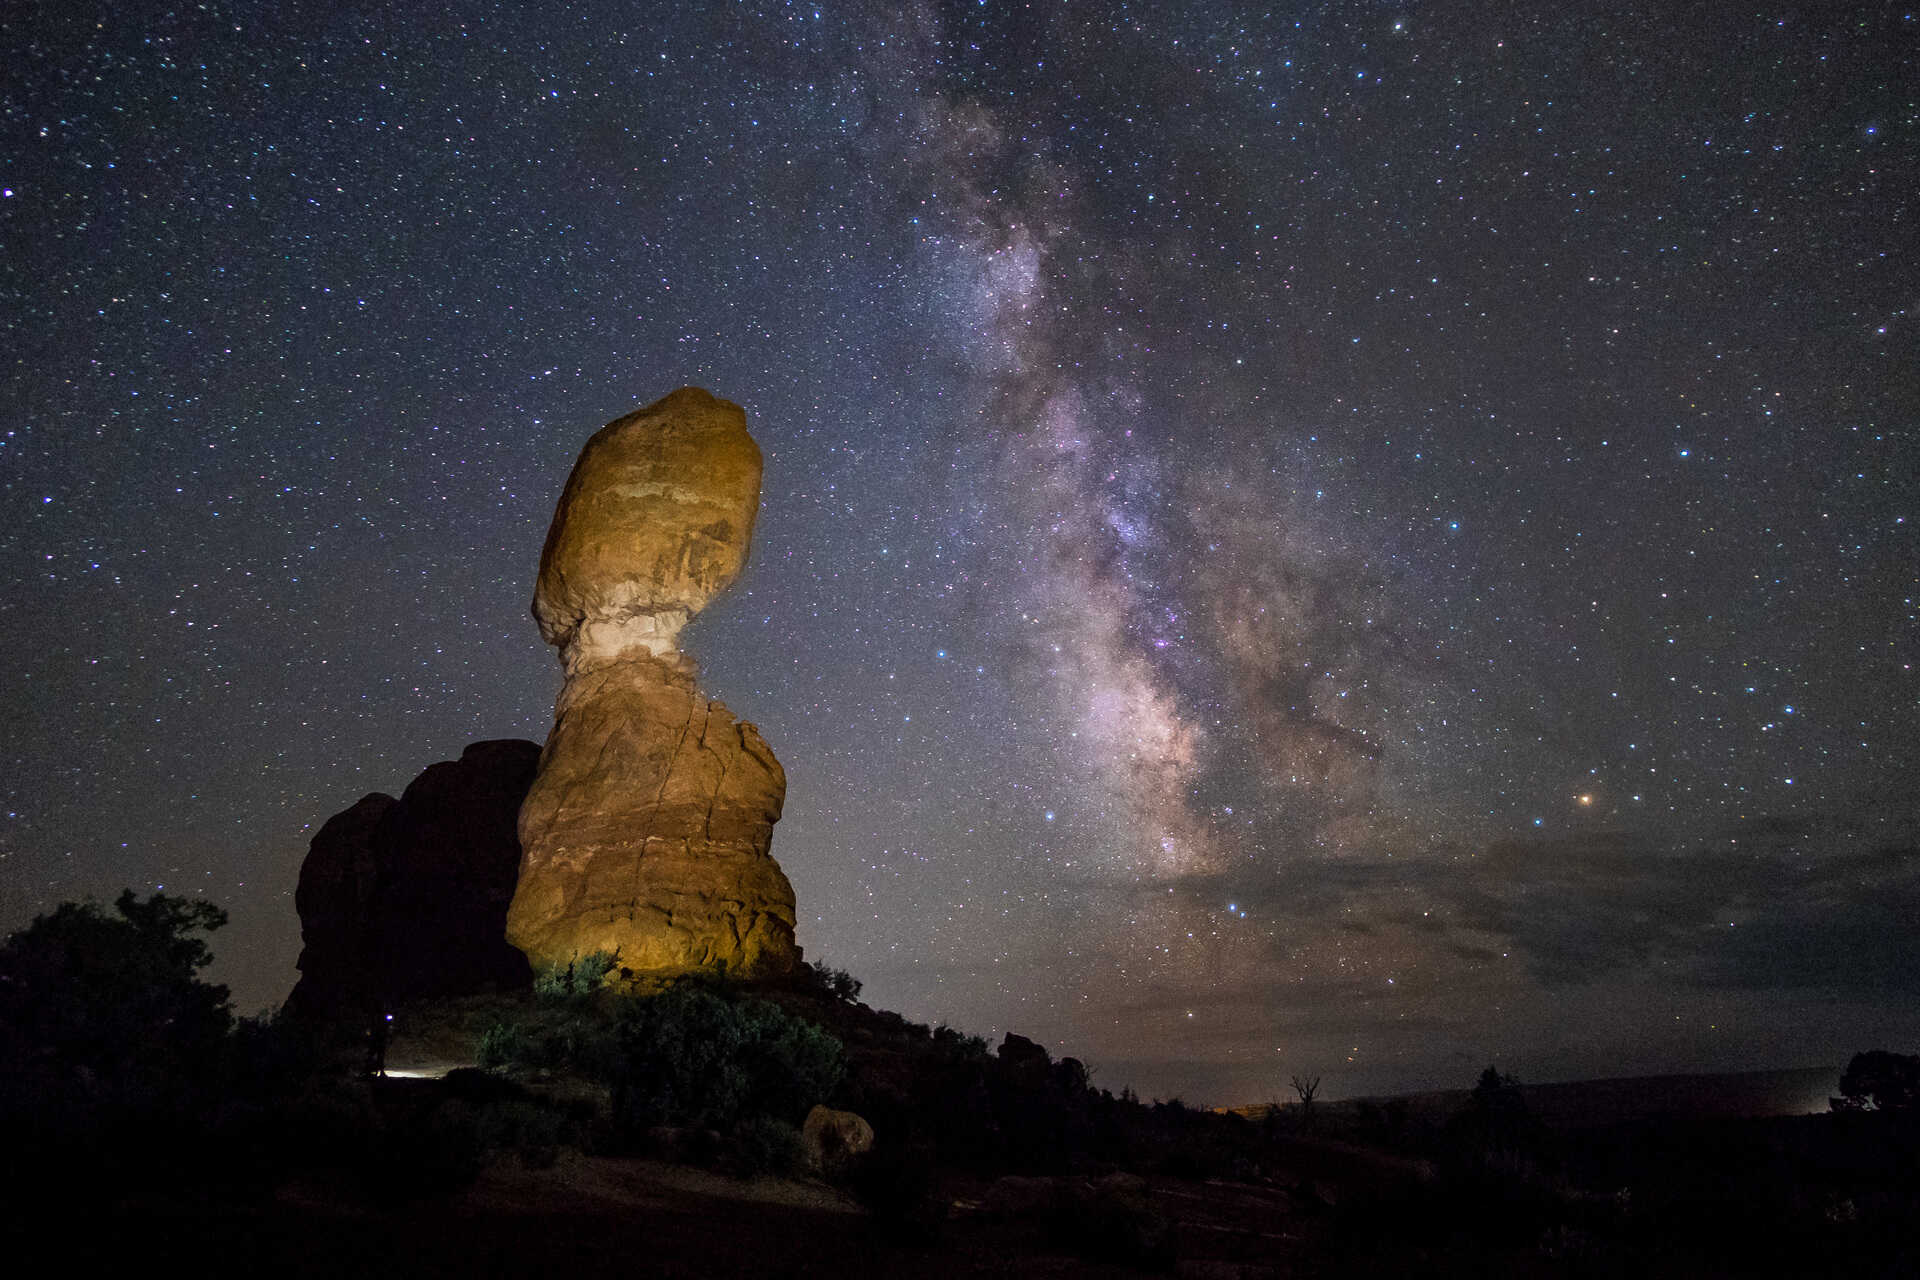 The Milky Way at Delicate Arch in Arches National Park